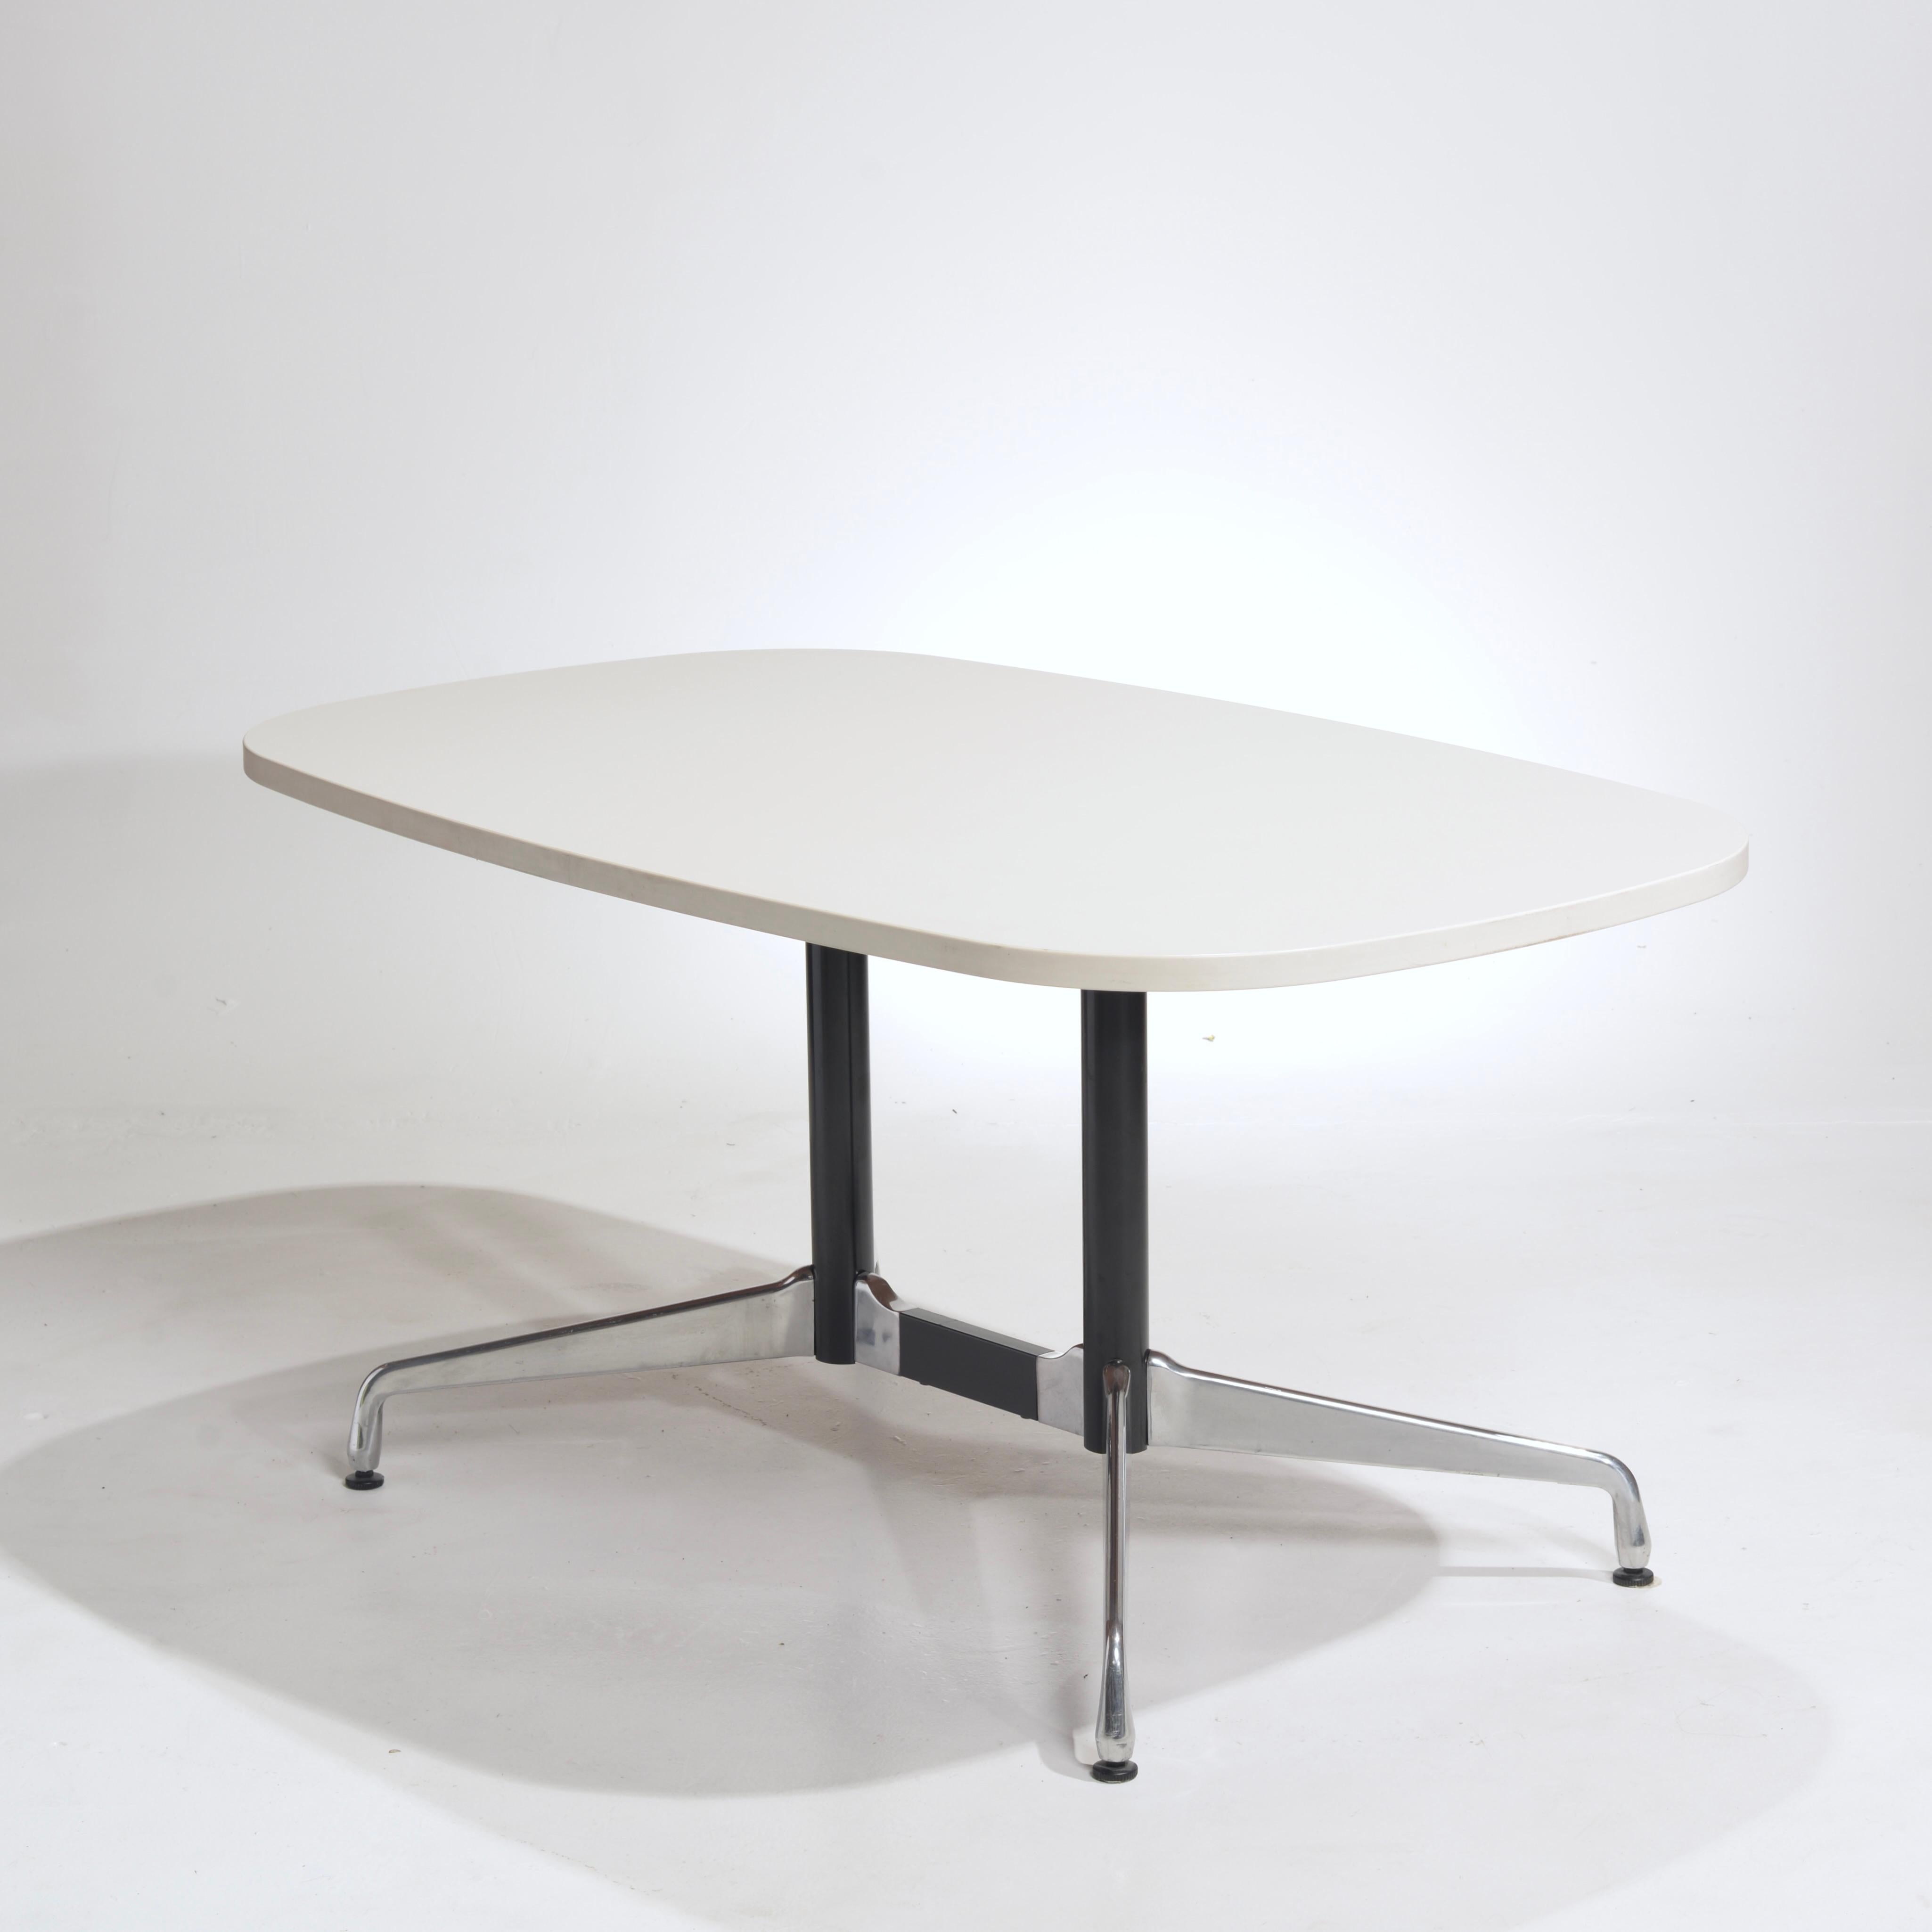 This is a racetrack shaped dining table designed by Charles and Ray Eames for Herman Miller. The tabletop is resting on the standard Eames segmented aluminum base. We have 4 in stock.